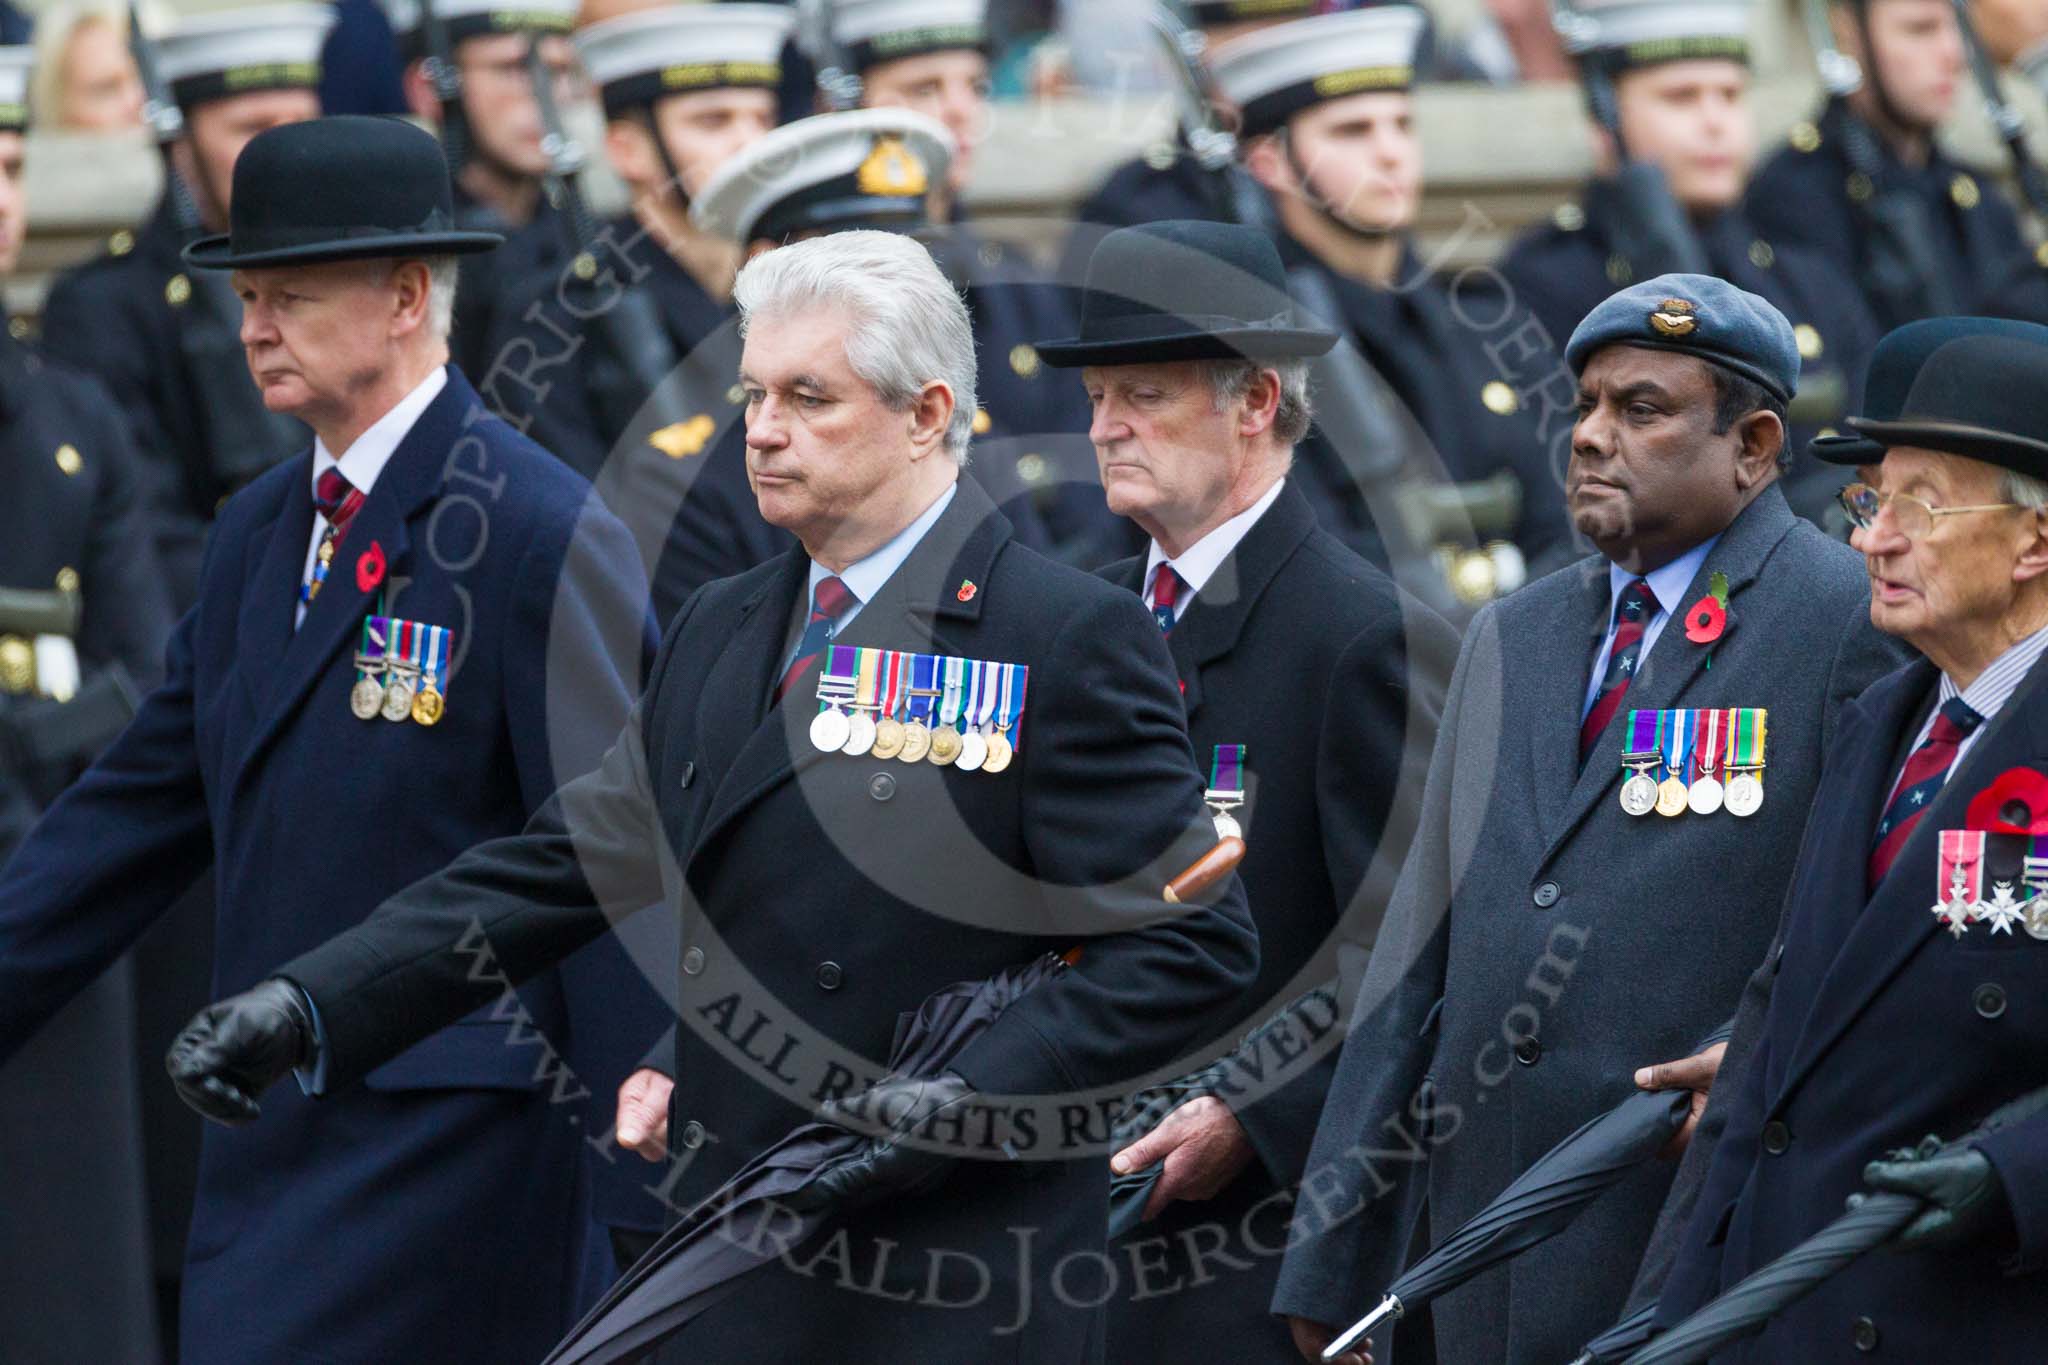 Remembrance Sunday at the Cenotaph 2015: C2, Royal Air Force Regiment Association.
Cenotaph, Whitehall, London SW1,
London,
Greater London,
United Kingdom,
on 08 November 2015 at 11:47, image #410